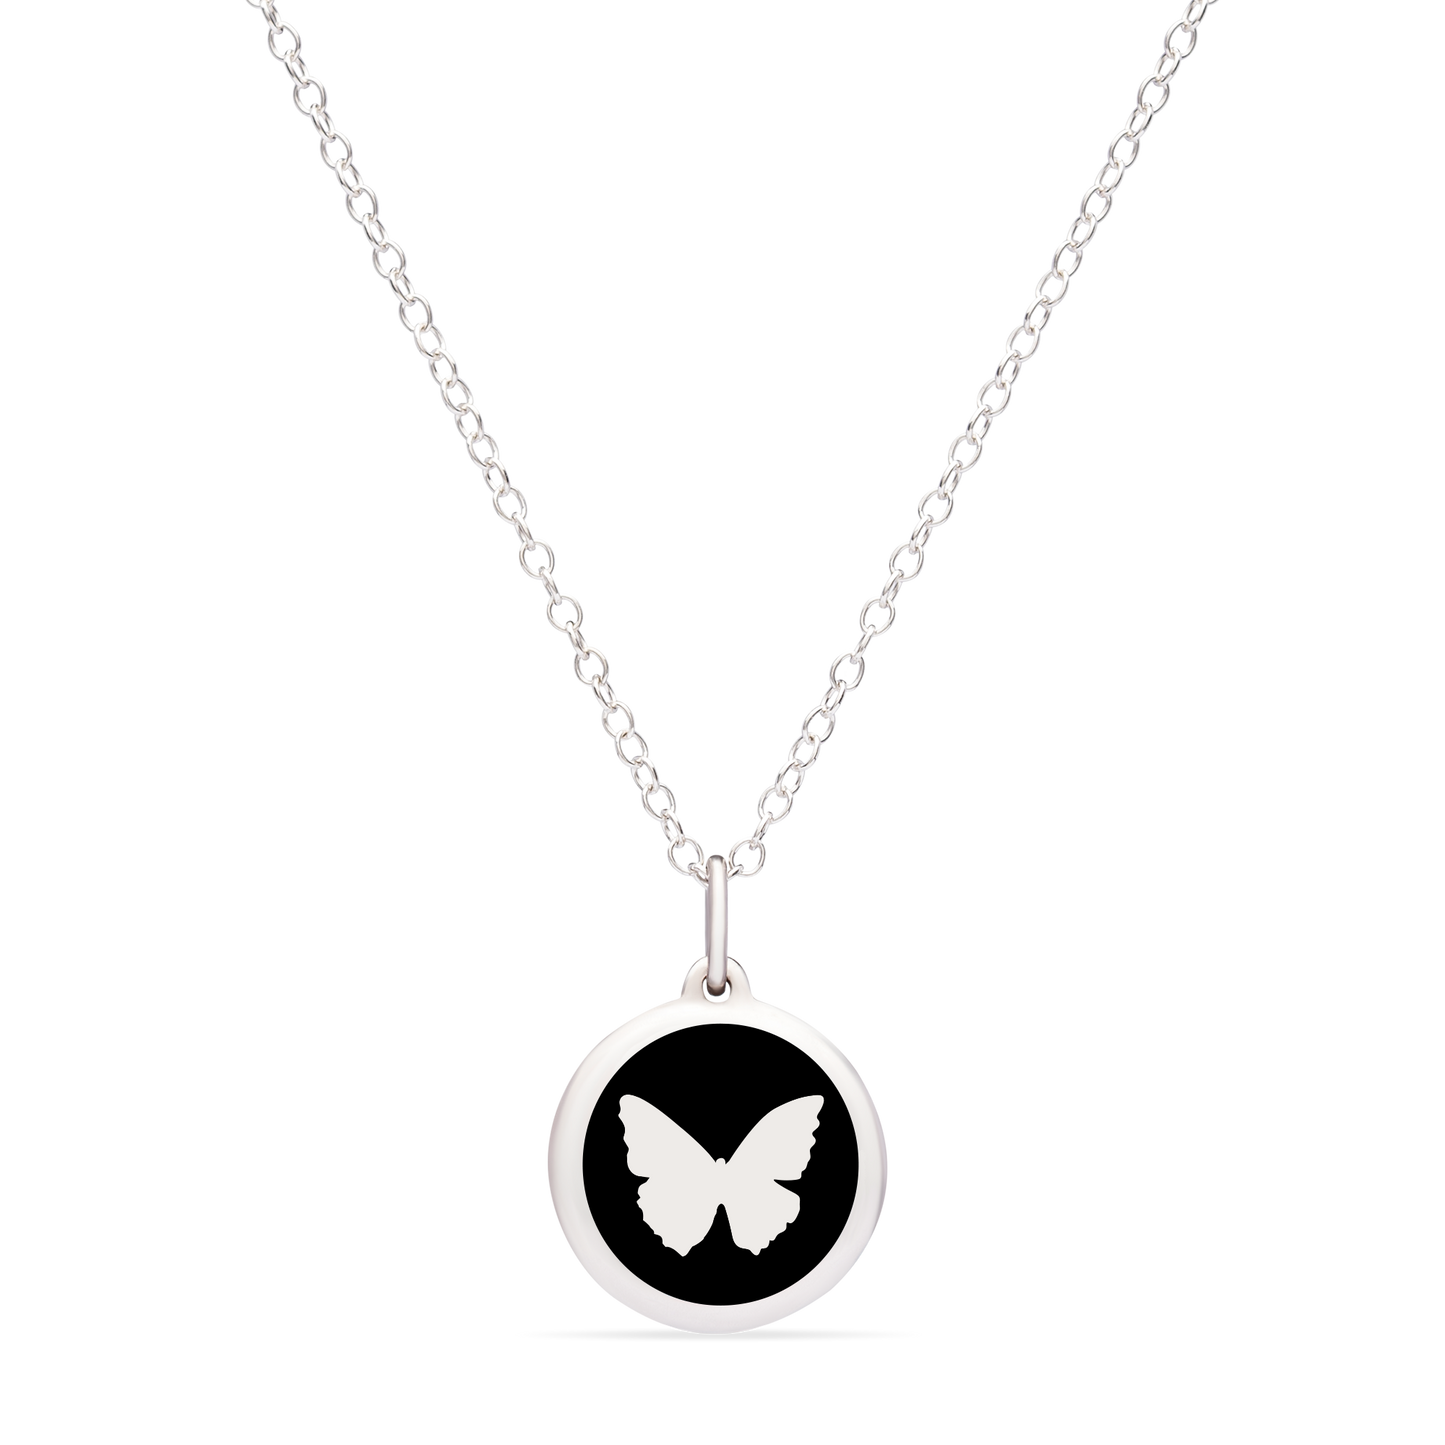 MINI BUTTERFLY CHARM sterling silver with rhodium plate